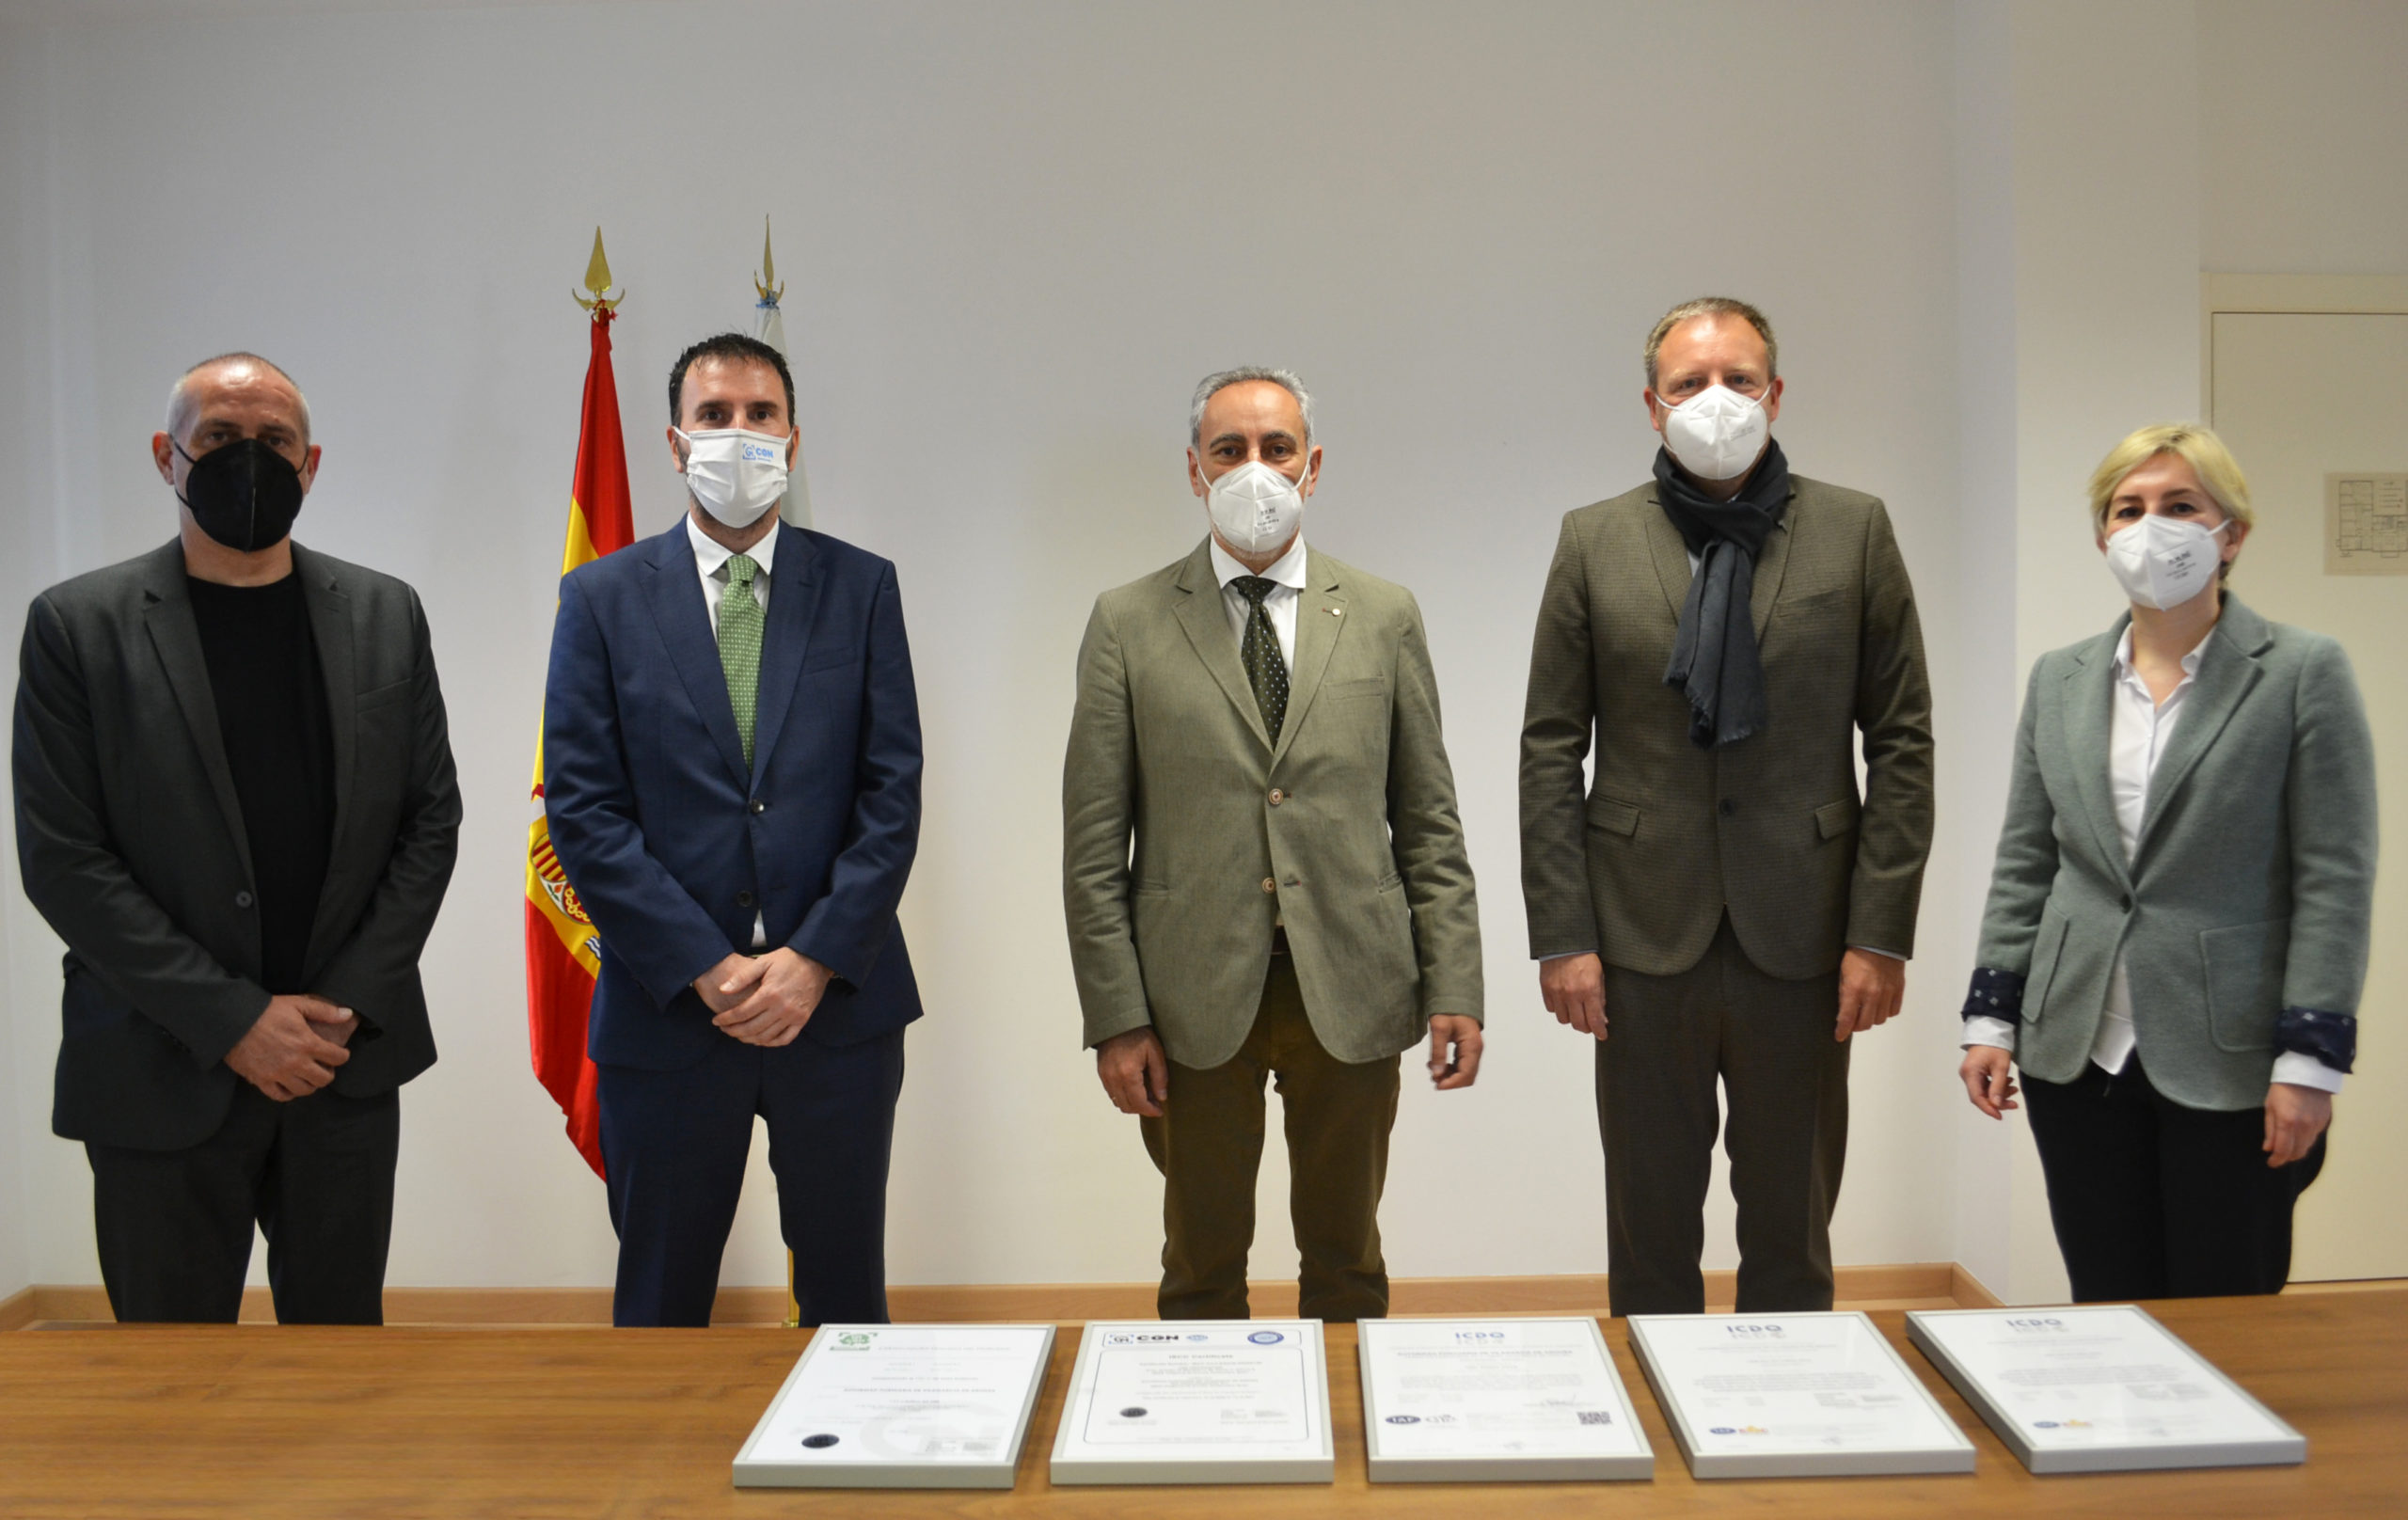 The Port Authority of Vilagarcia de Arousa has compensated its Carbon Footprint